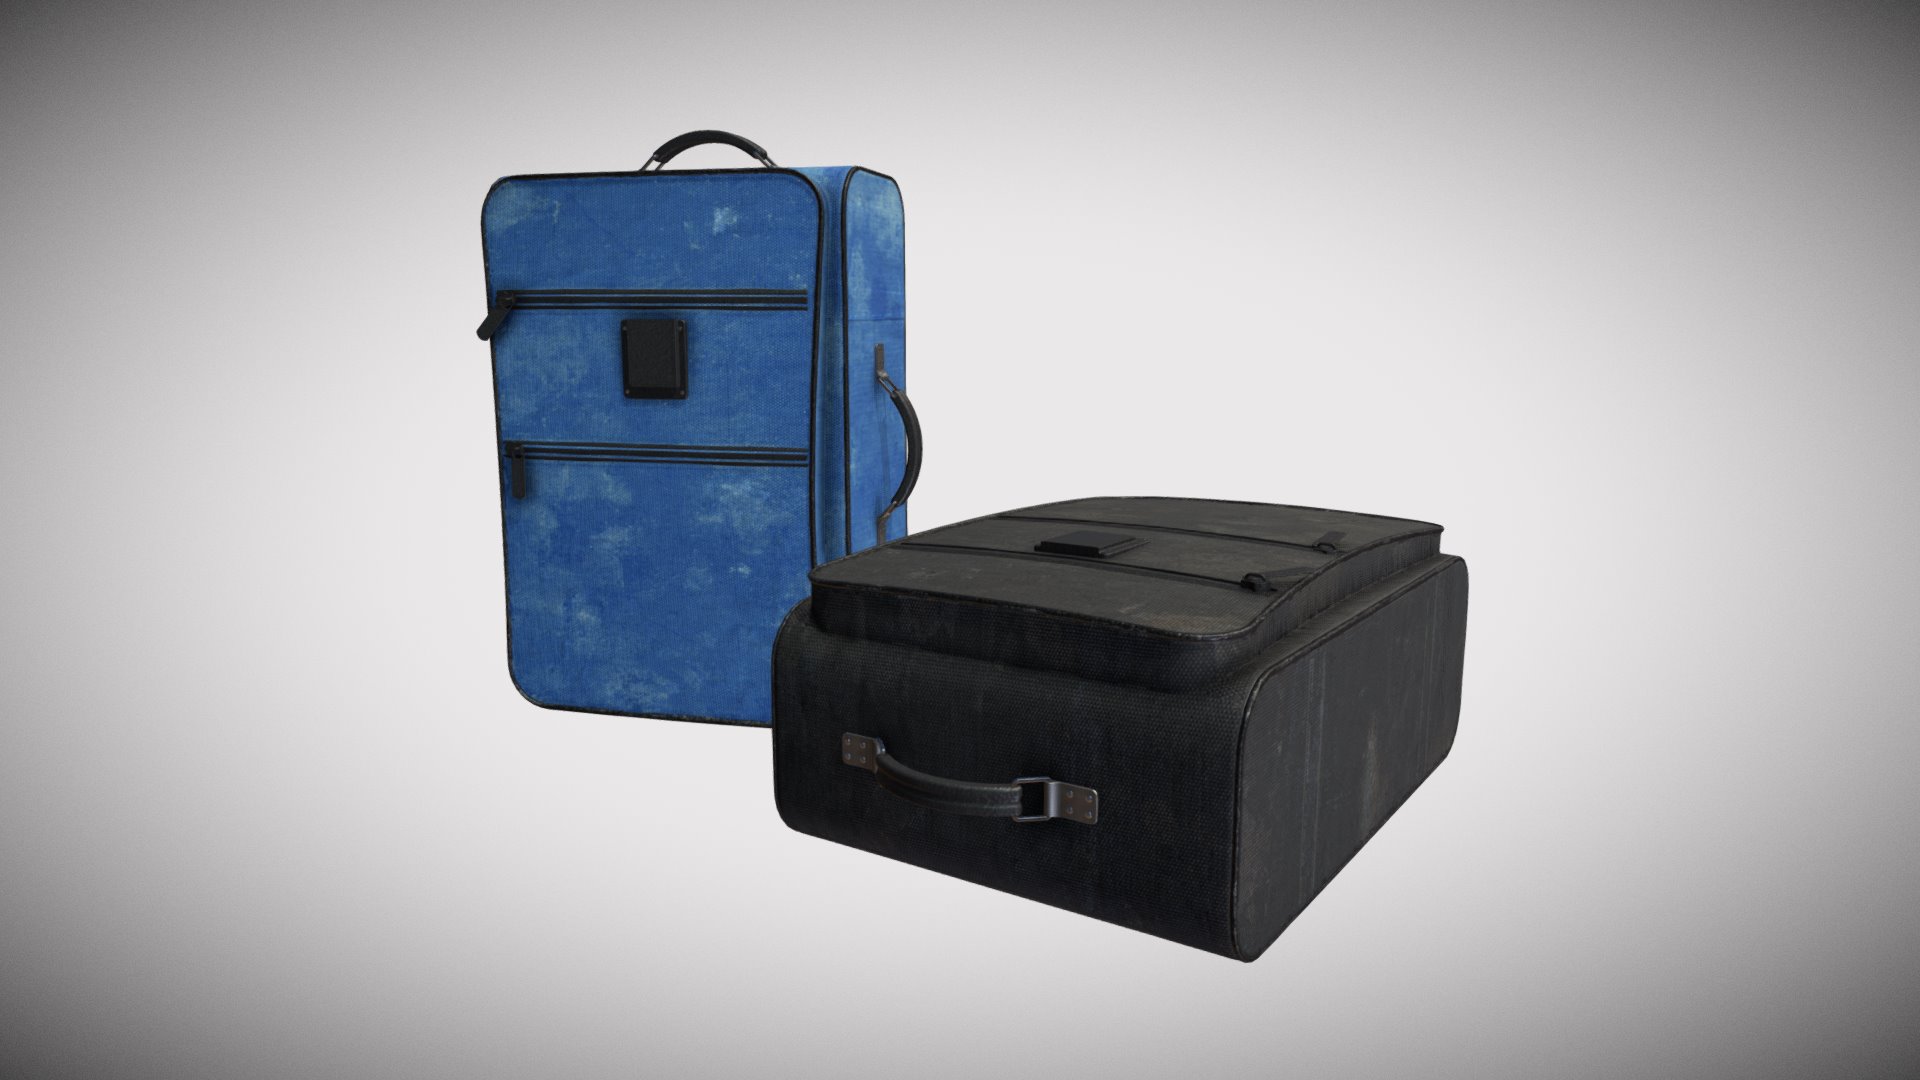 3D model Bags - This is a 3D model of the Bags. The 3D model is about a pair of suitcases.